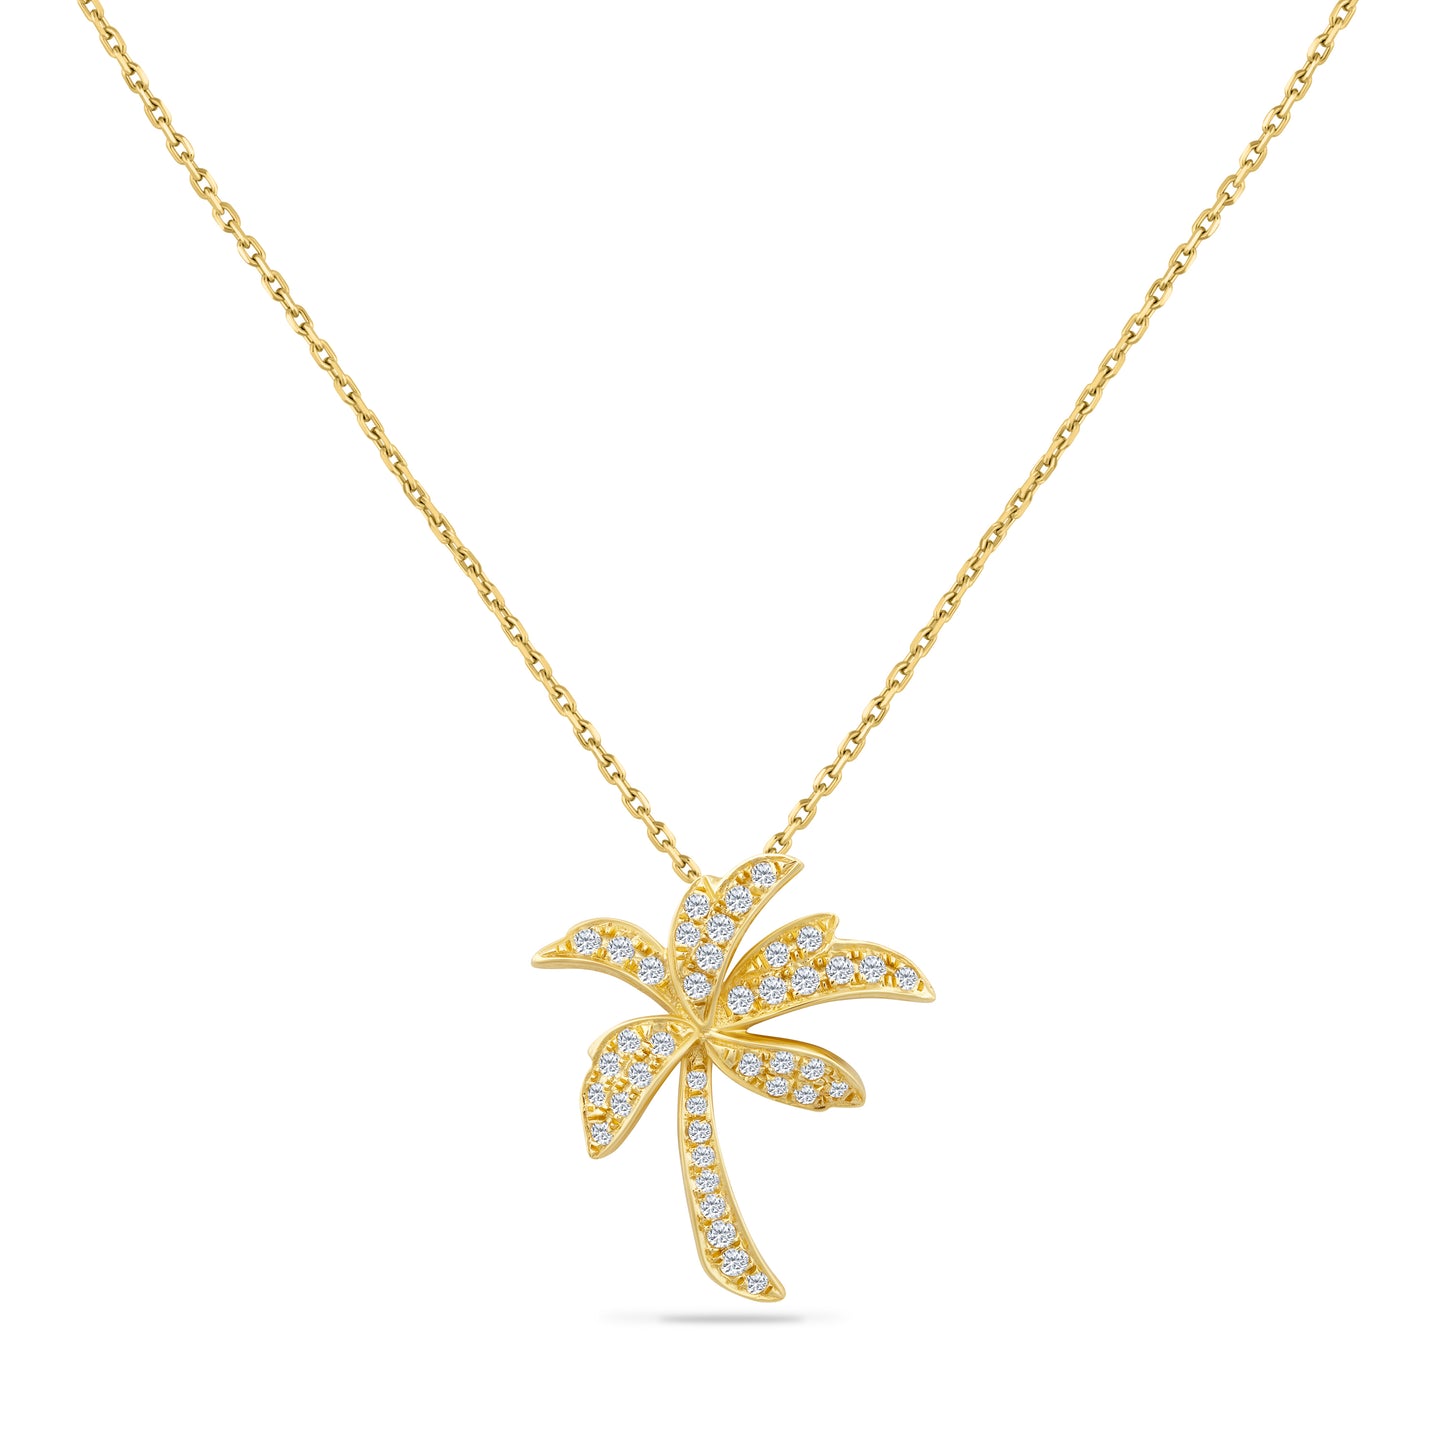 14K PALM TREE PENDANT WITH 40 DIAMONDS 0.35CT  ON  18 INCHES CABLE CHAIN